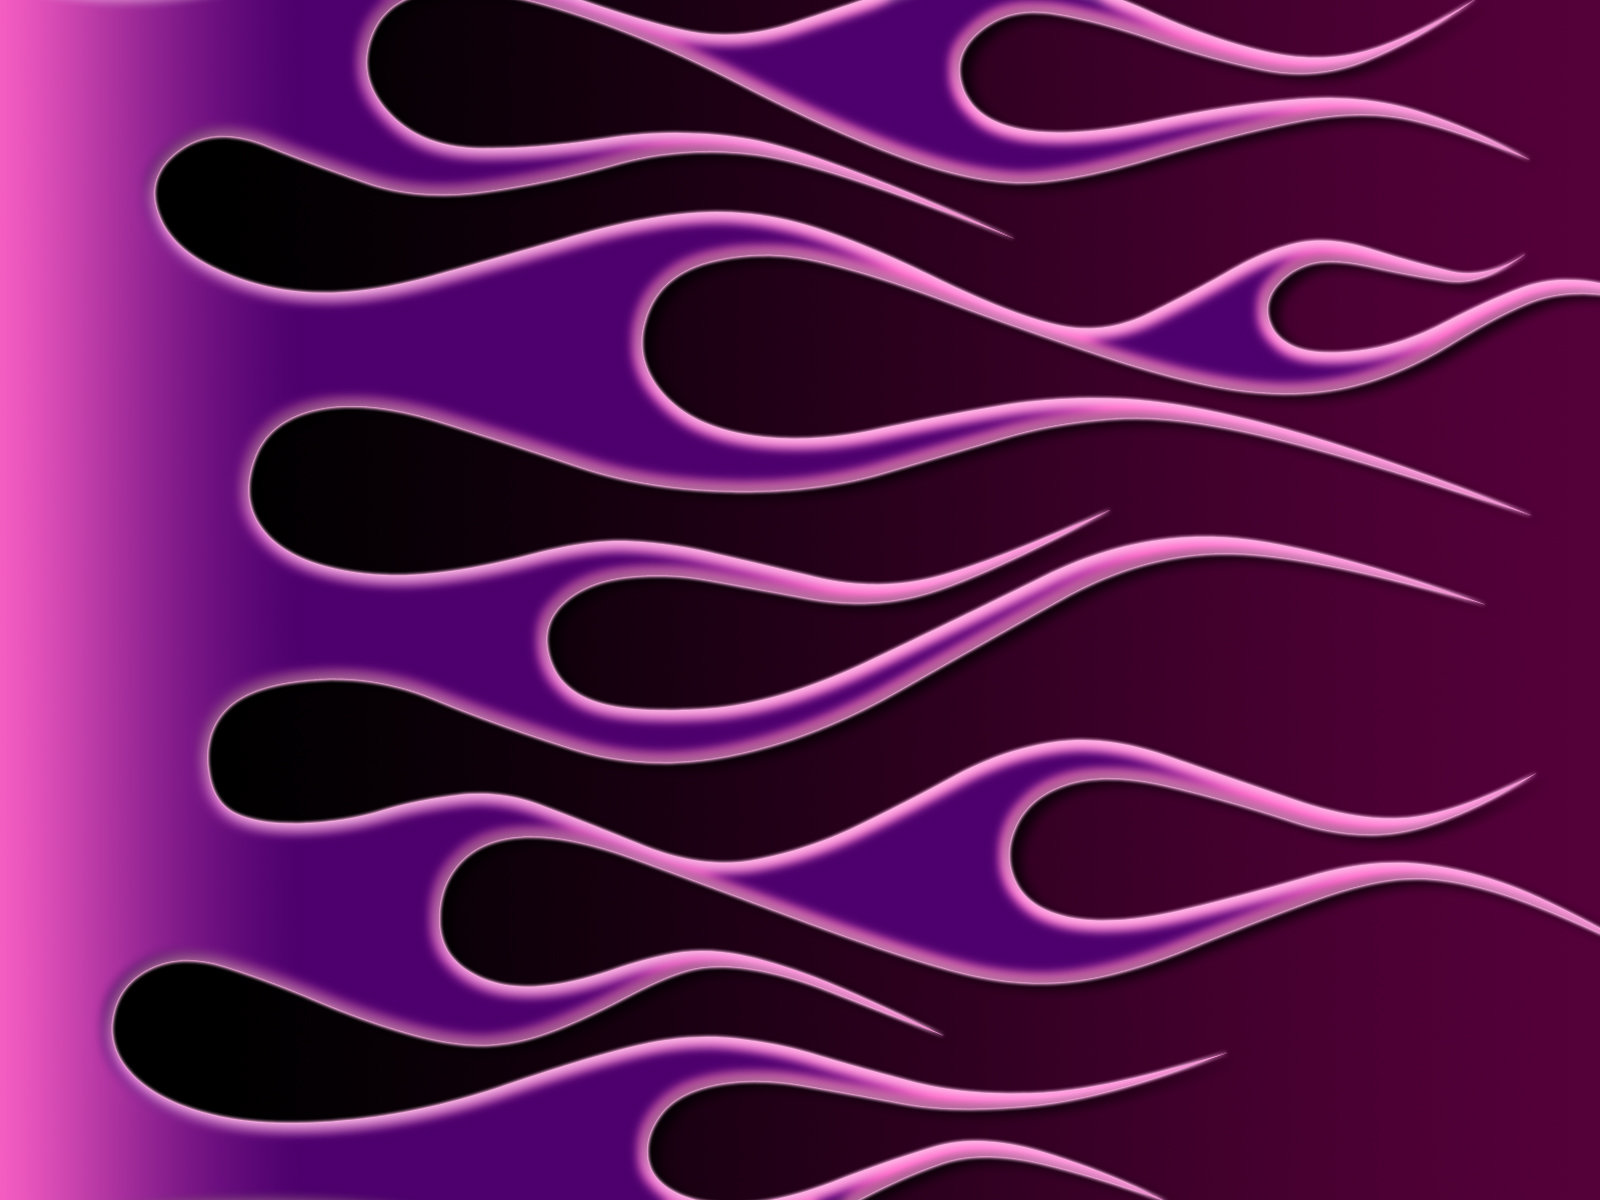 Flames   pink and purple by jbensch on